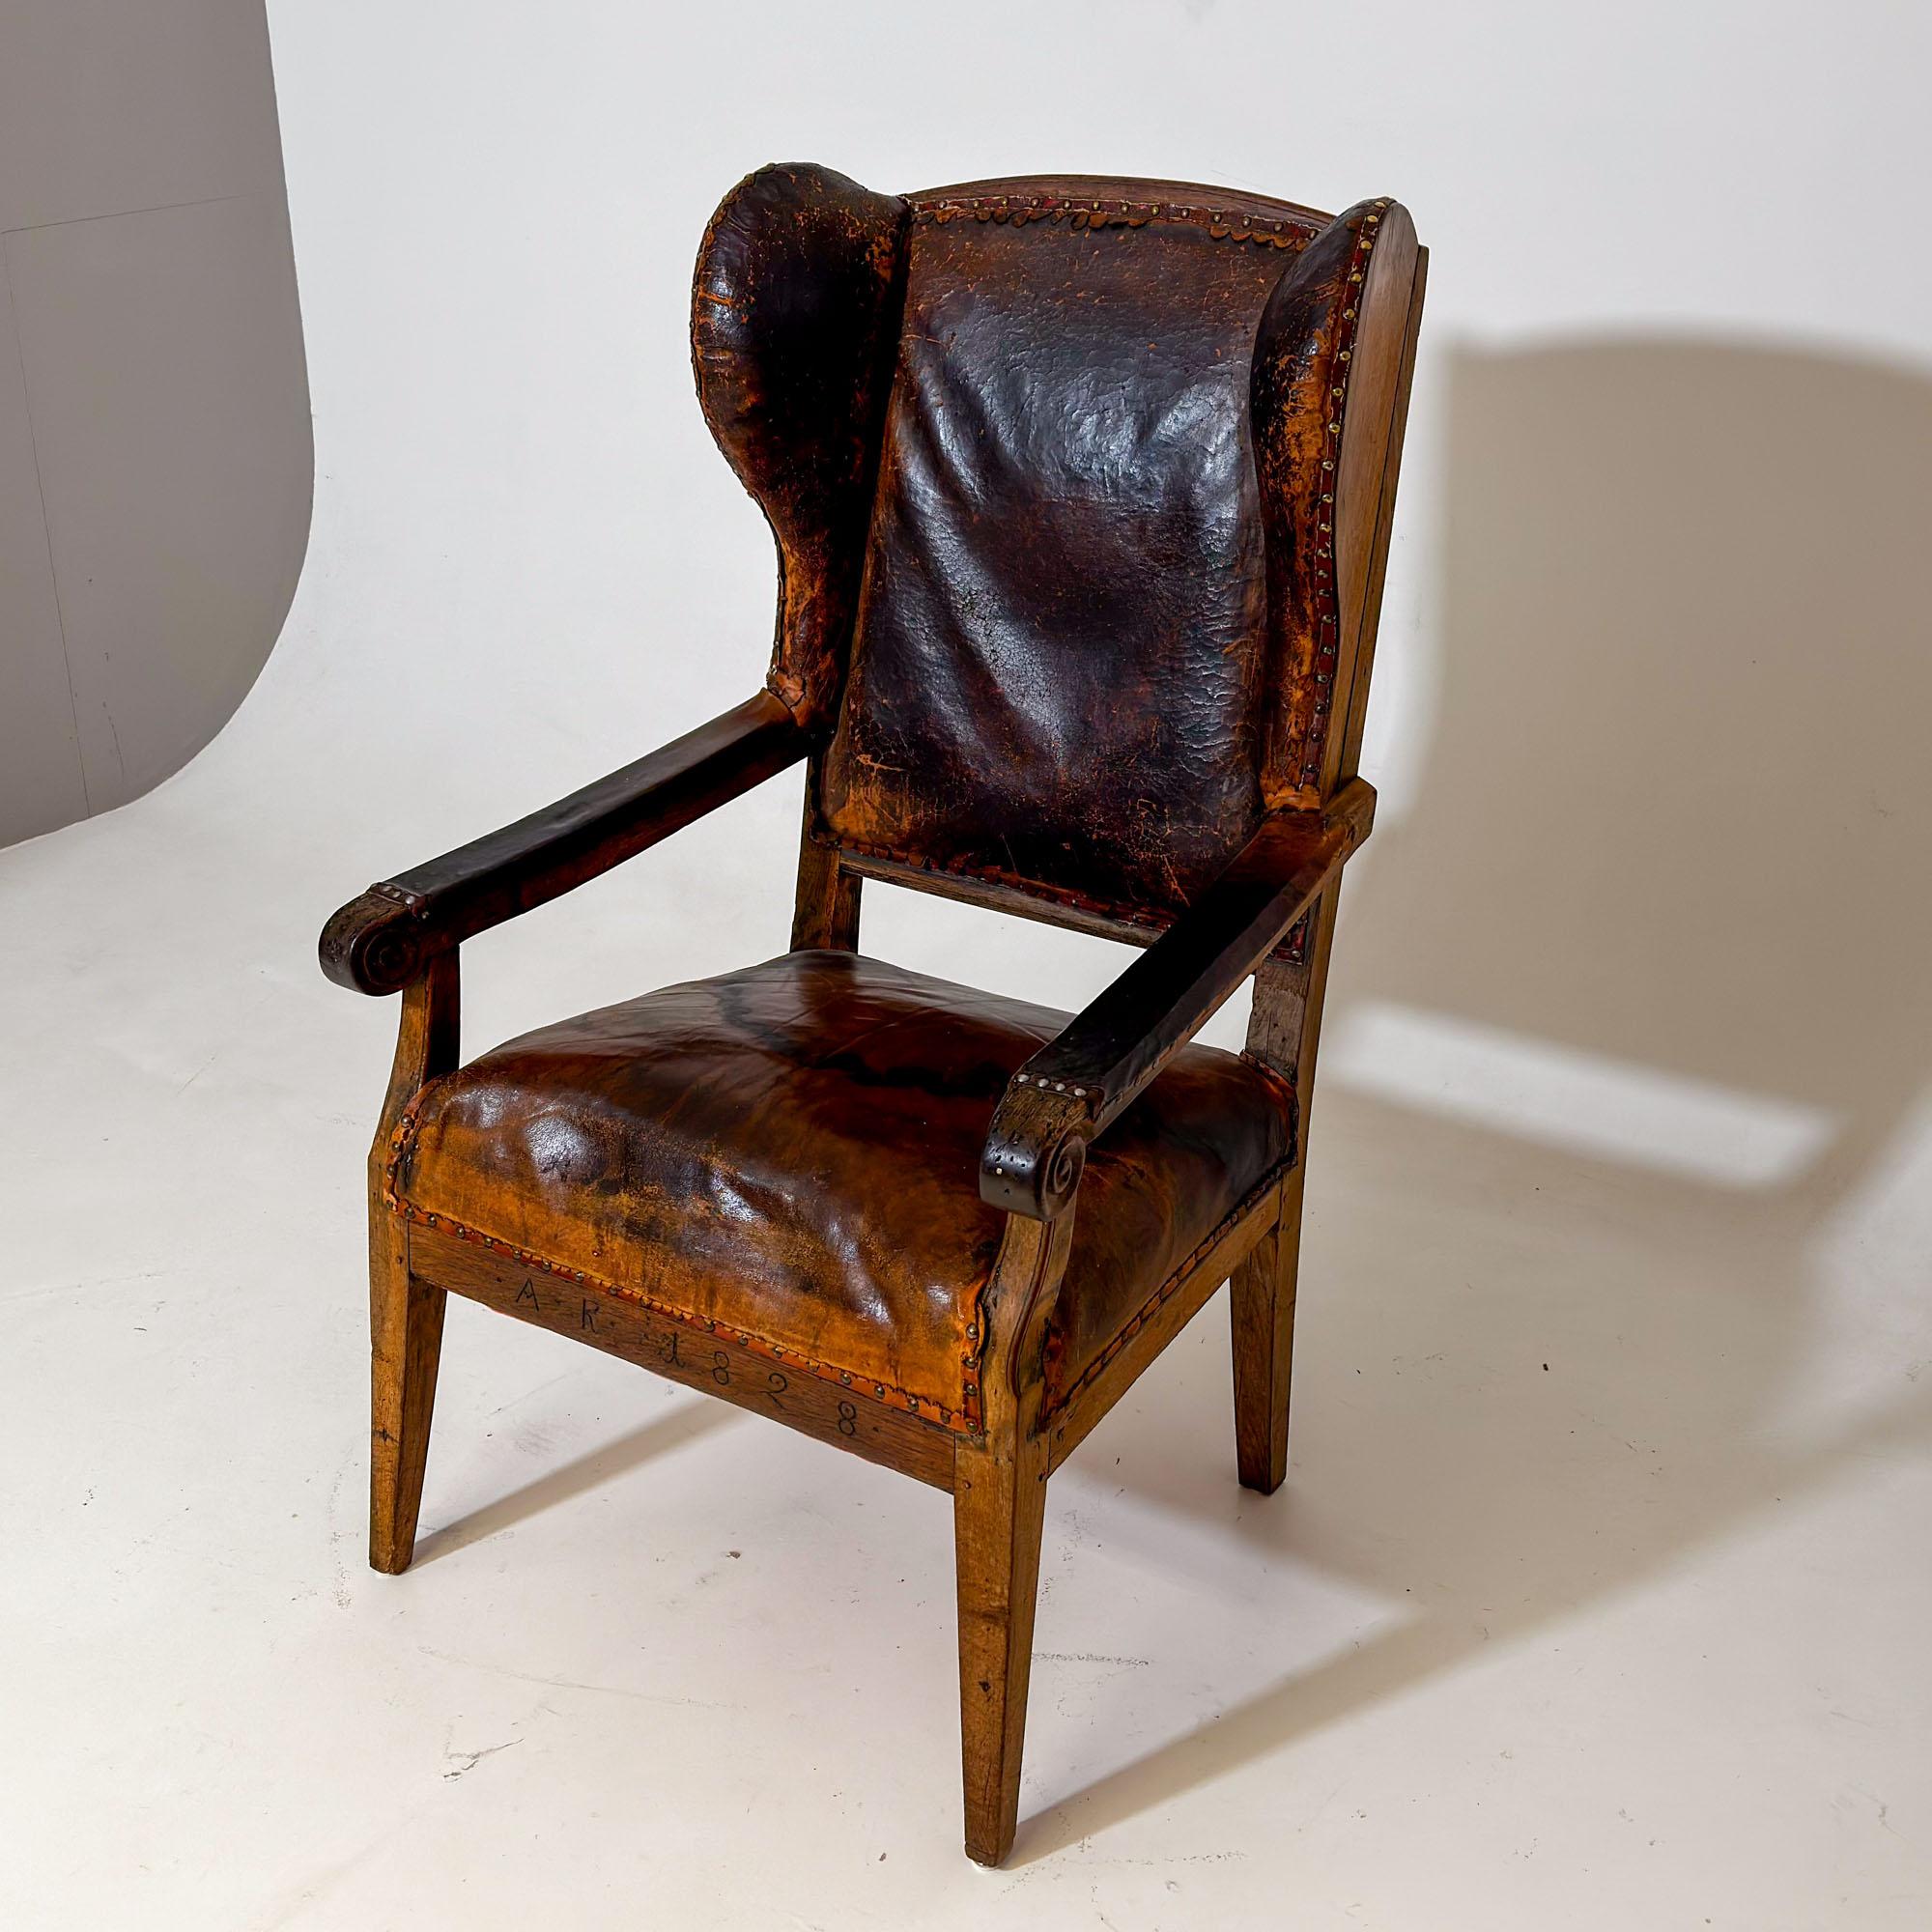 Armchair with leather upholstery, dated 1828 For Sale 1